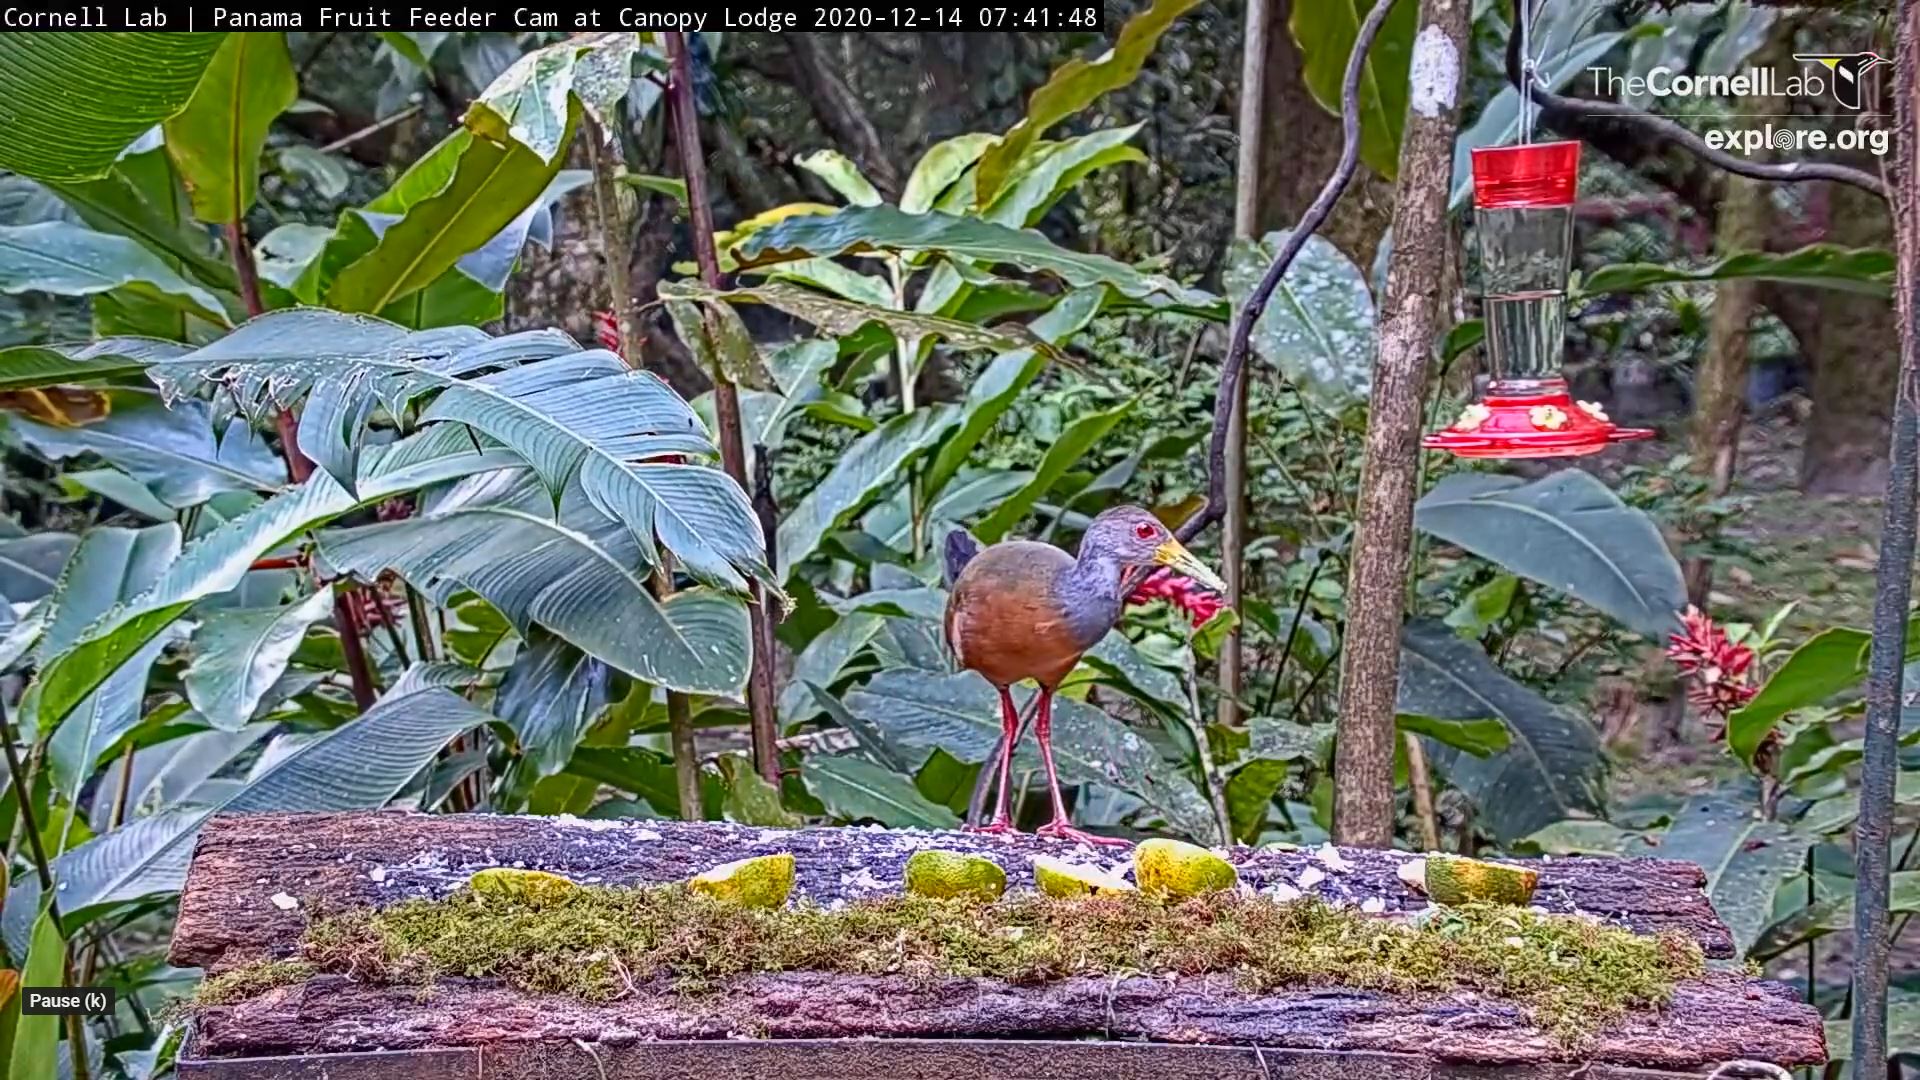 A great-cowled wood-rail is standing on the panama fruit feeder table facing right. There is some moss and yellow-colored oranges on the table. The wood-rail is a large bird with pink legs, gray-blue had, yellow bill, red eyes, and red-brown back. In the background is a hummingbird feeders and large green leaves and other vegetation.